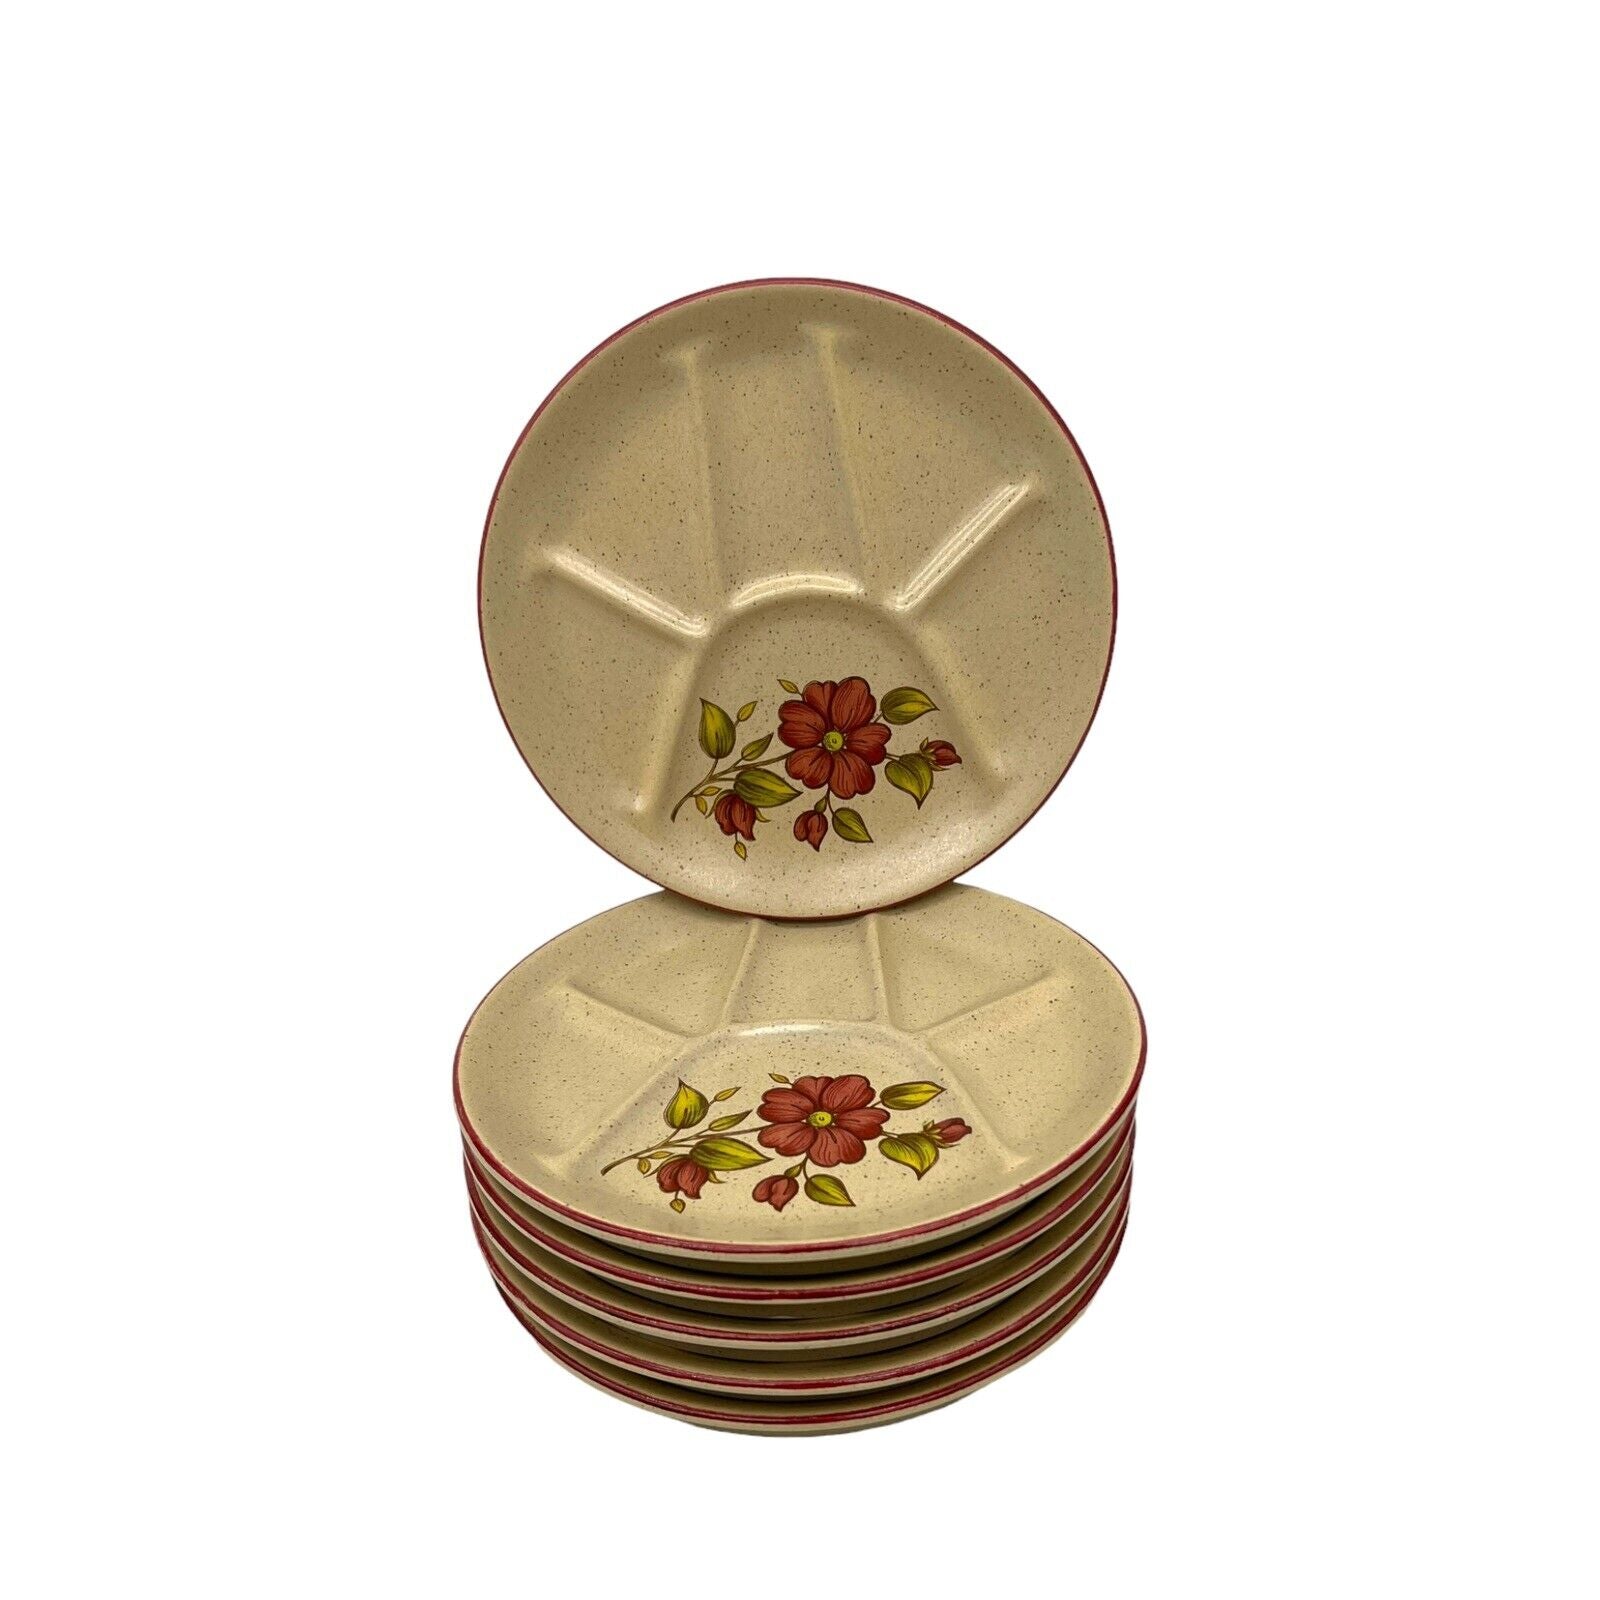 image 2 French glazed stoneware fondue sectioned plate set sold by All Things French Store